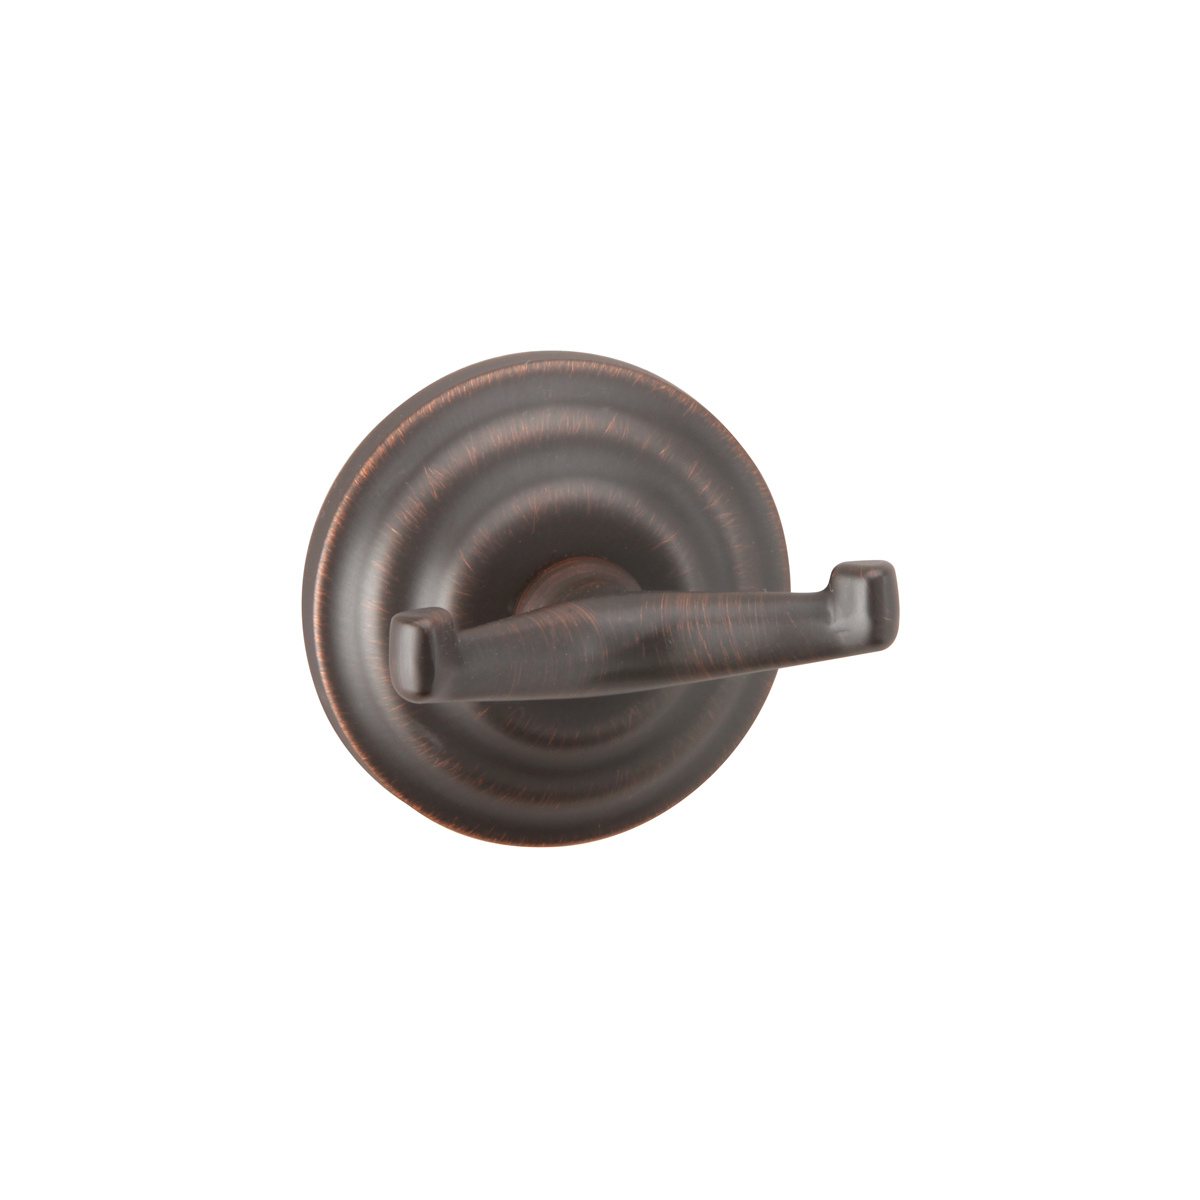 Brentwood Oil Rubbed Bronze Robe Hook 